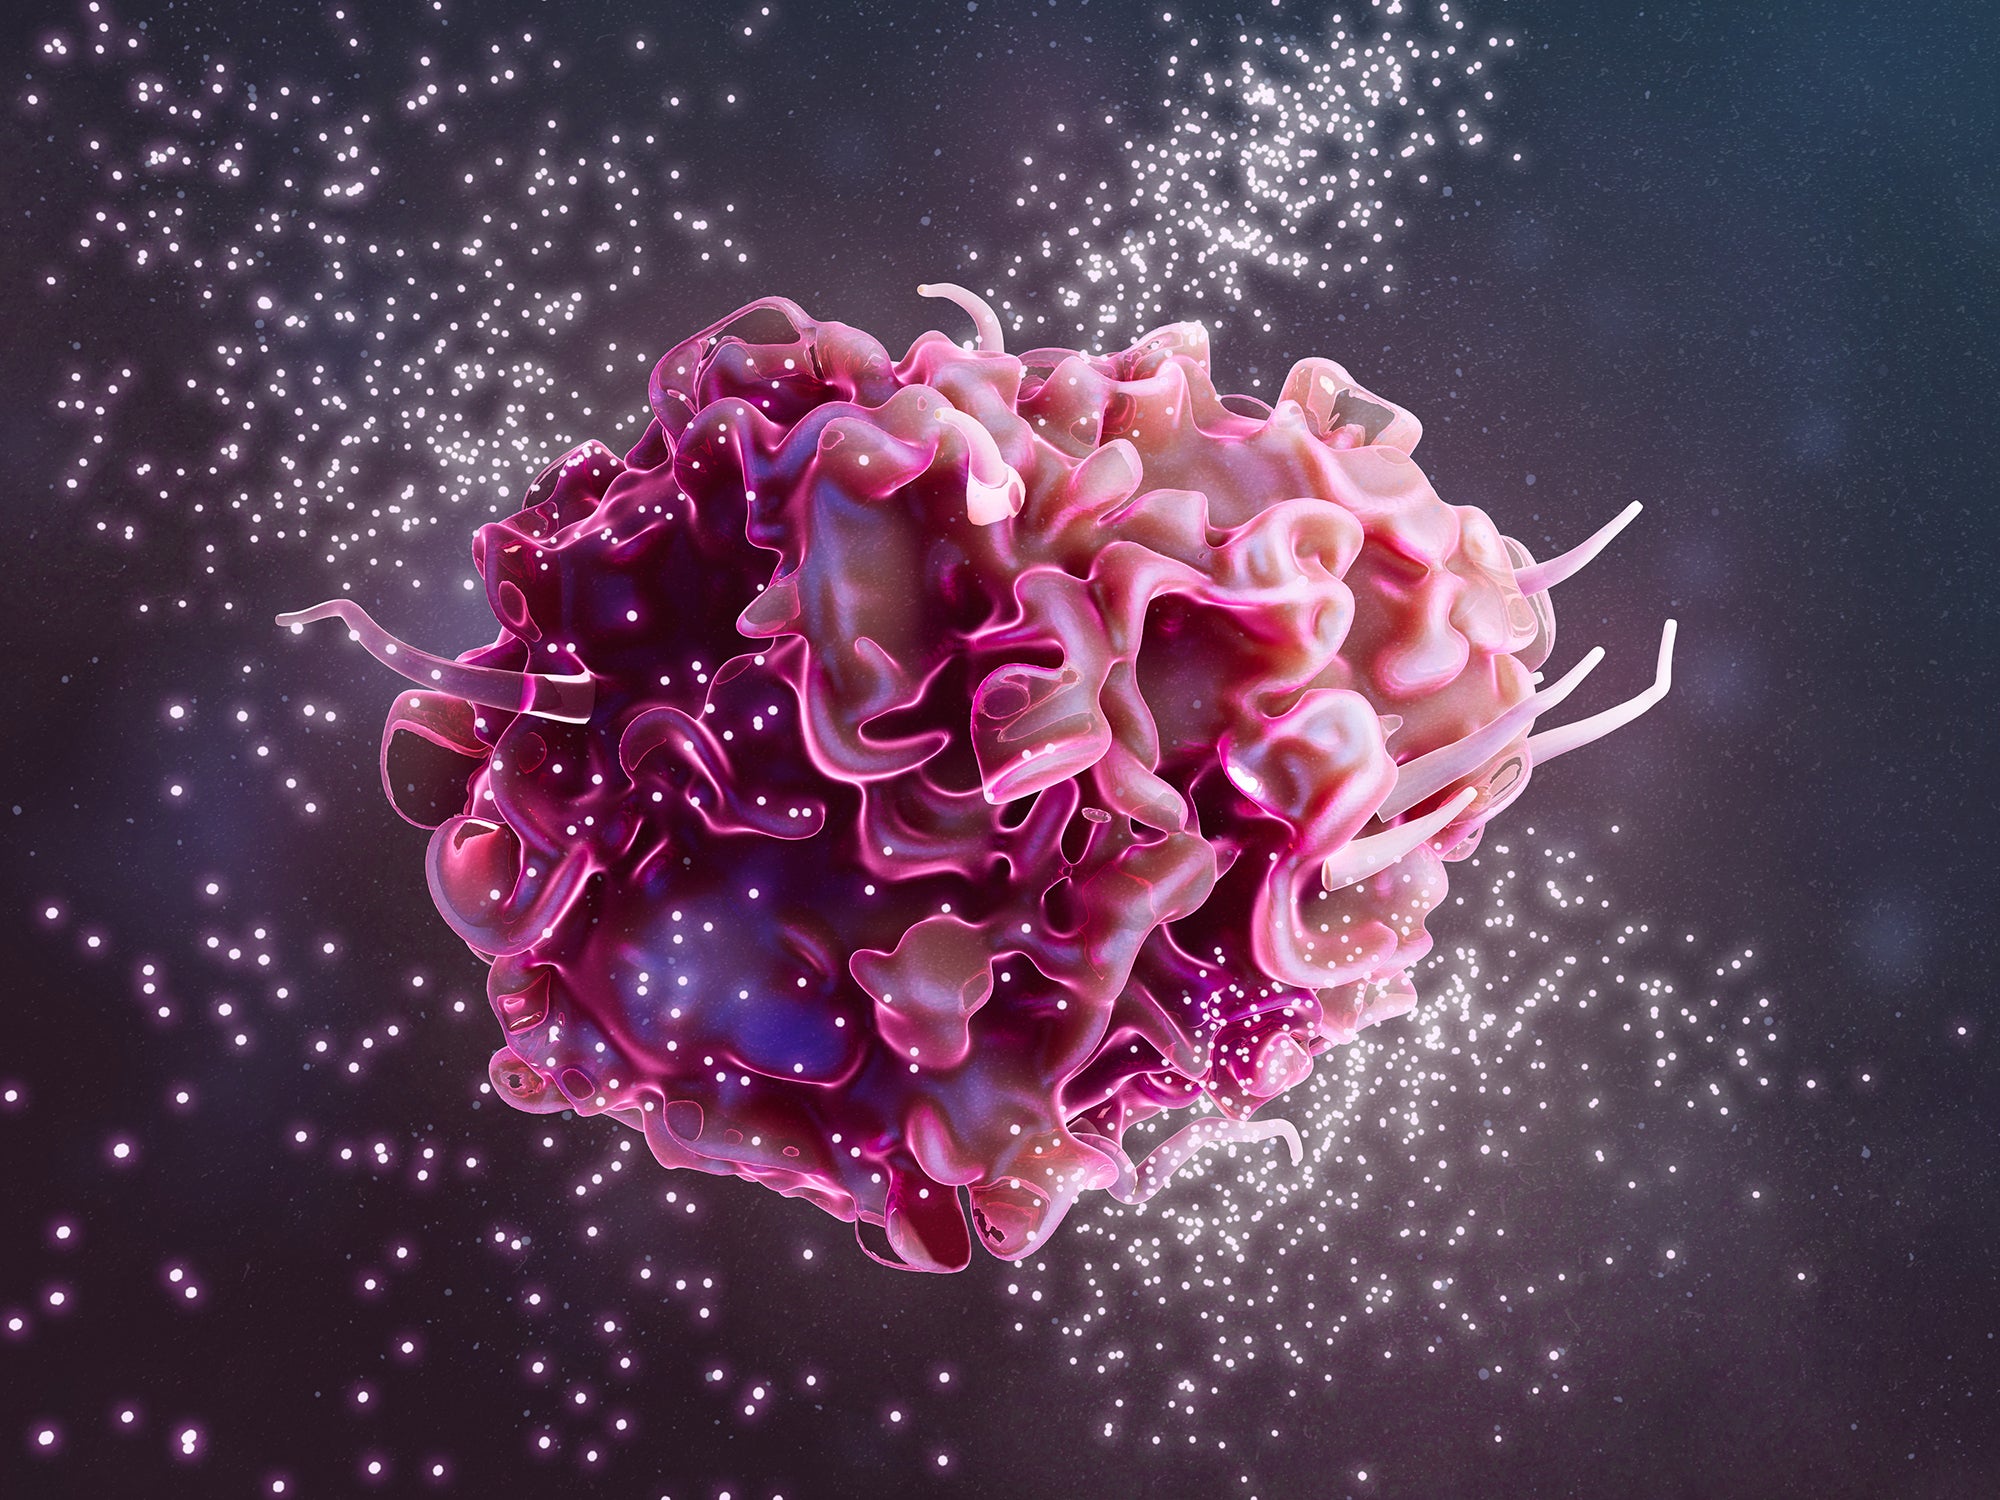 Illustration of a macrophage releasing cytokines. Macrophages are cells of the body's immune system. They phagocytose (engulf) and destroy pathogens, dead cells and cellular debris